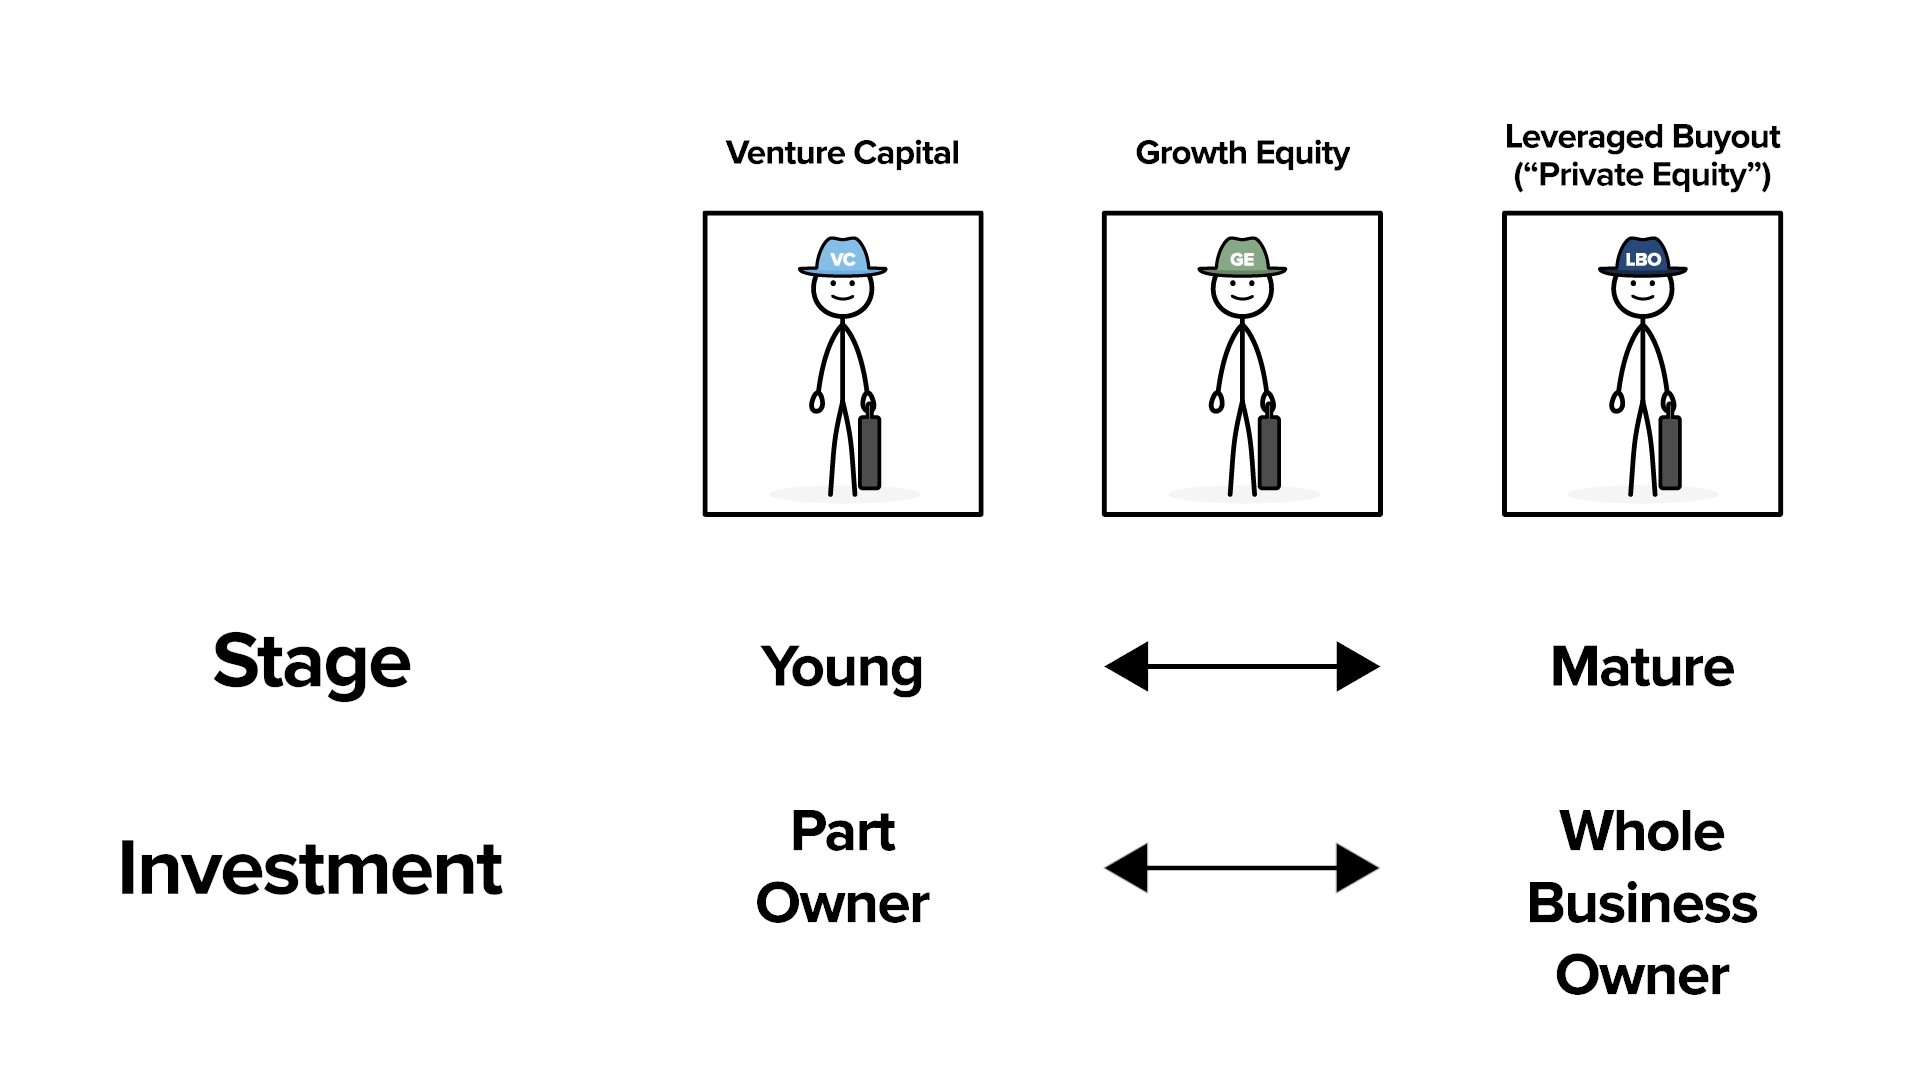 The different stages and investment for Venture Capital, Growth Equity, and Private Equity funds